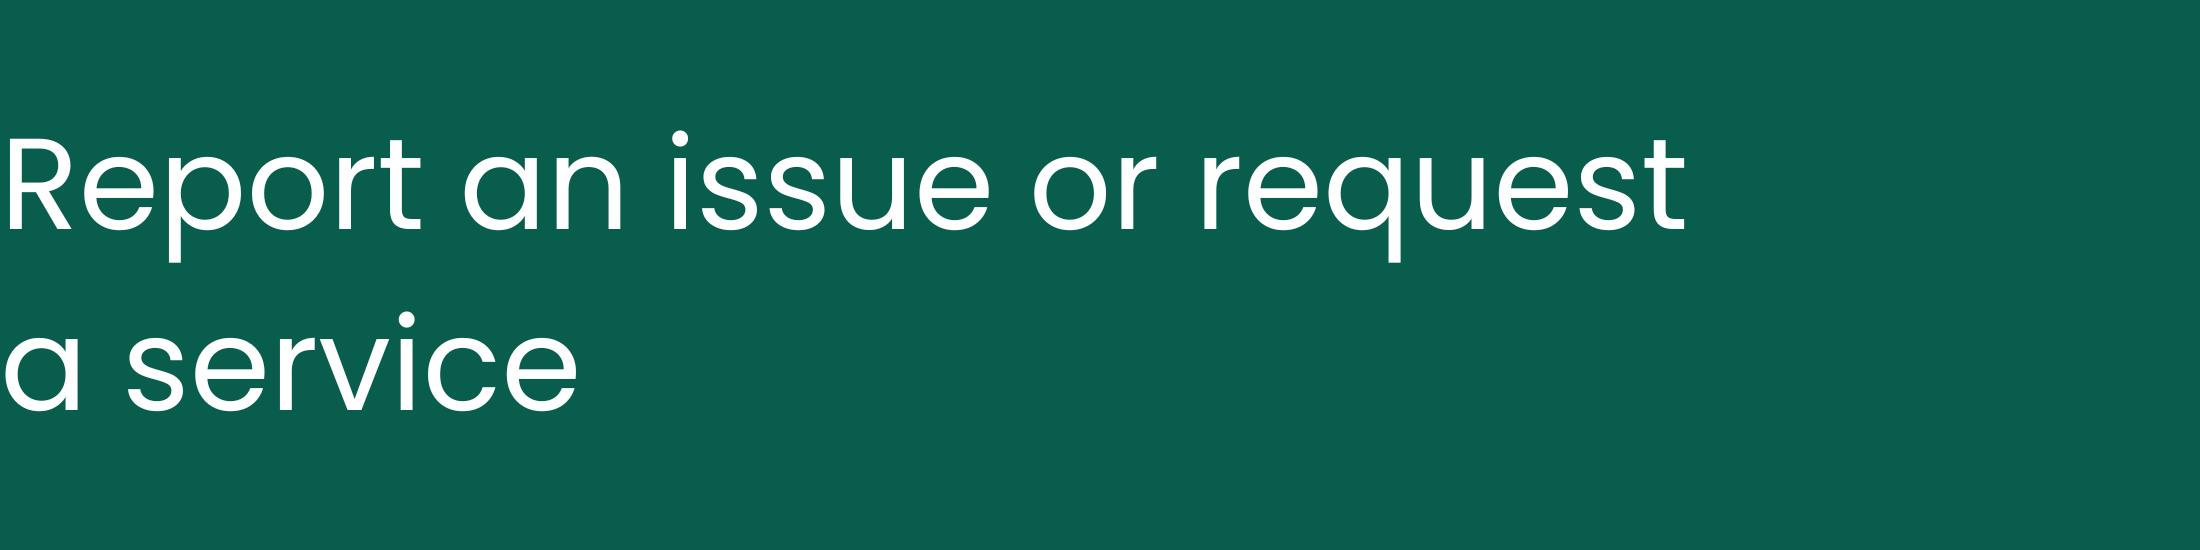 Green background and white text saying 'Report an issue or request a service'